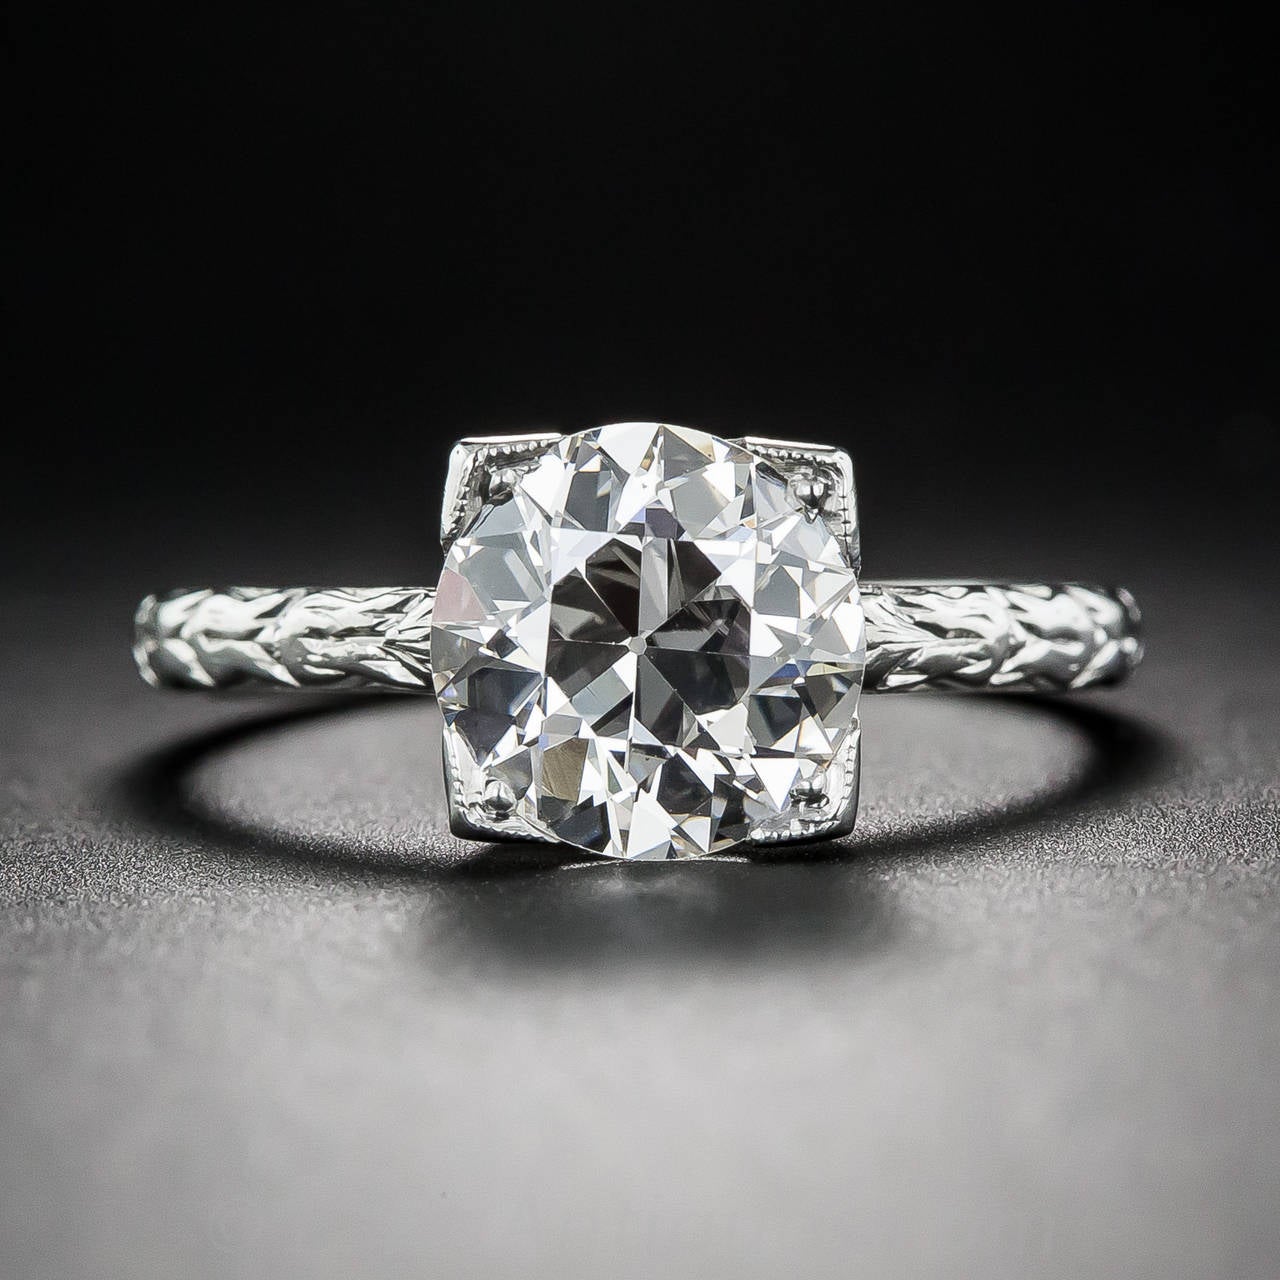 A simply gorgeous 2.07 carat European-cut diamond is the shining star of this early-20th century vintage diamond engagement ring by America’s most celebrated house of jewels - Tiffany & Company. The sparkling stone is classically presented in